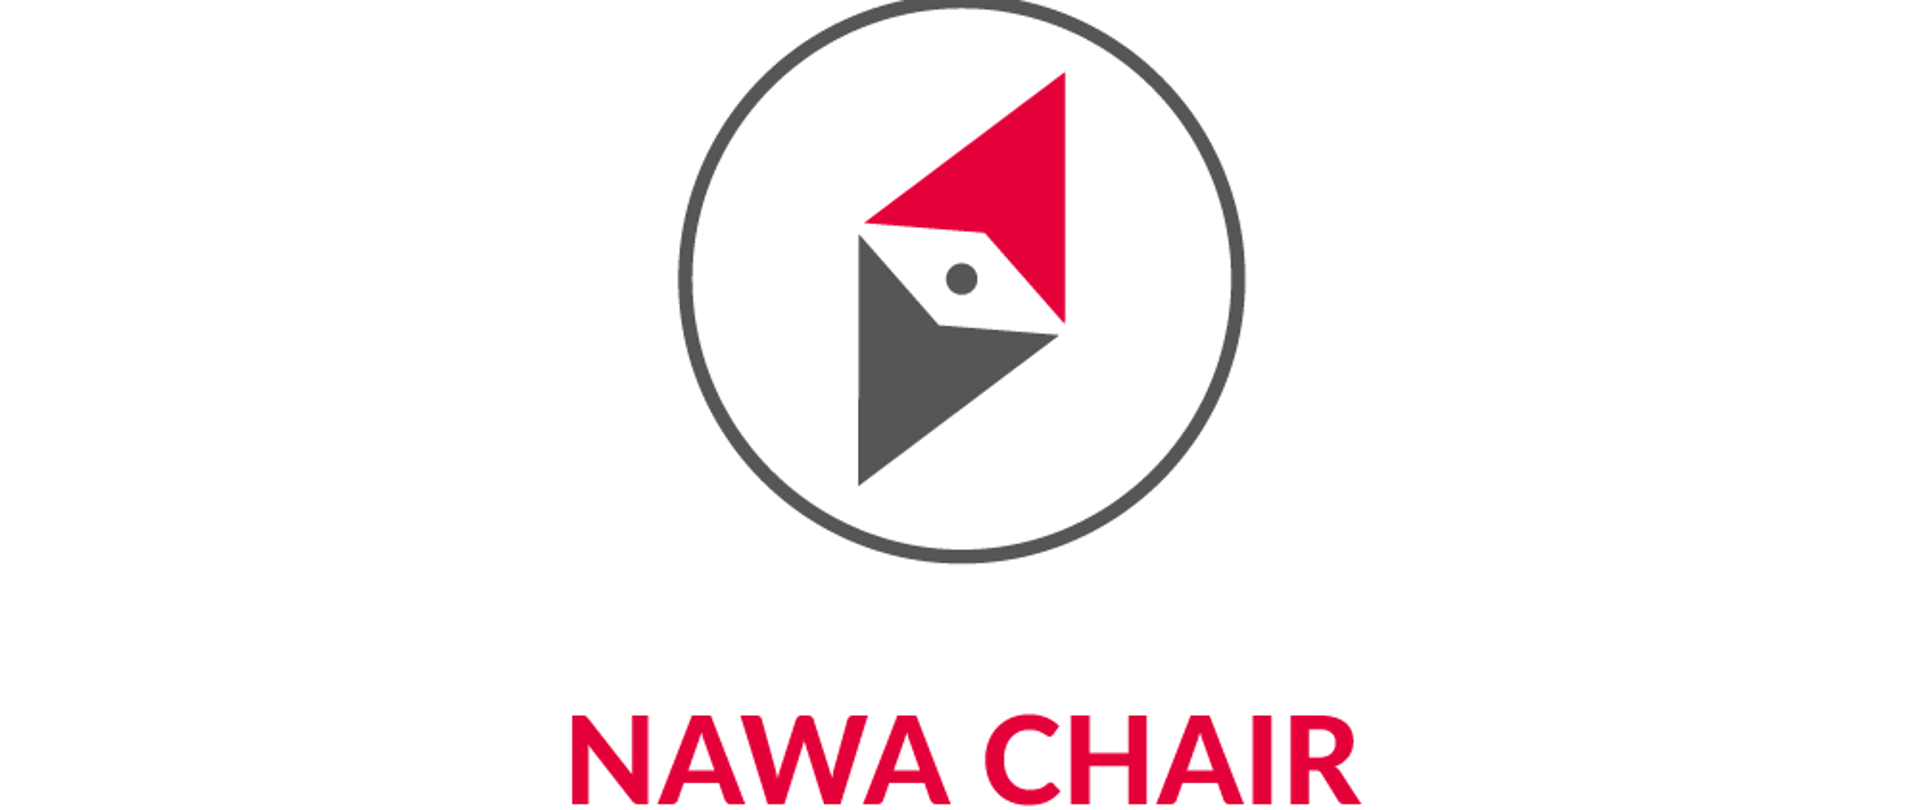 NAWA Chair - Guest Professorship in Poland